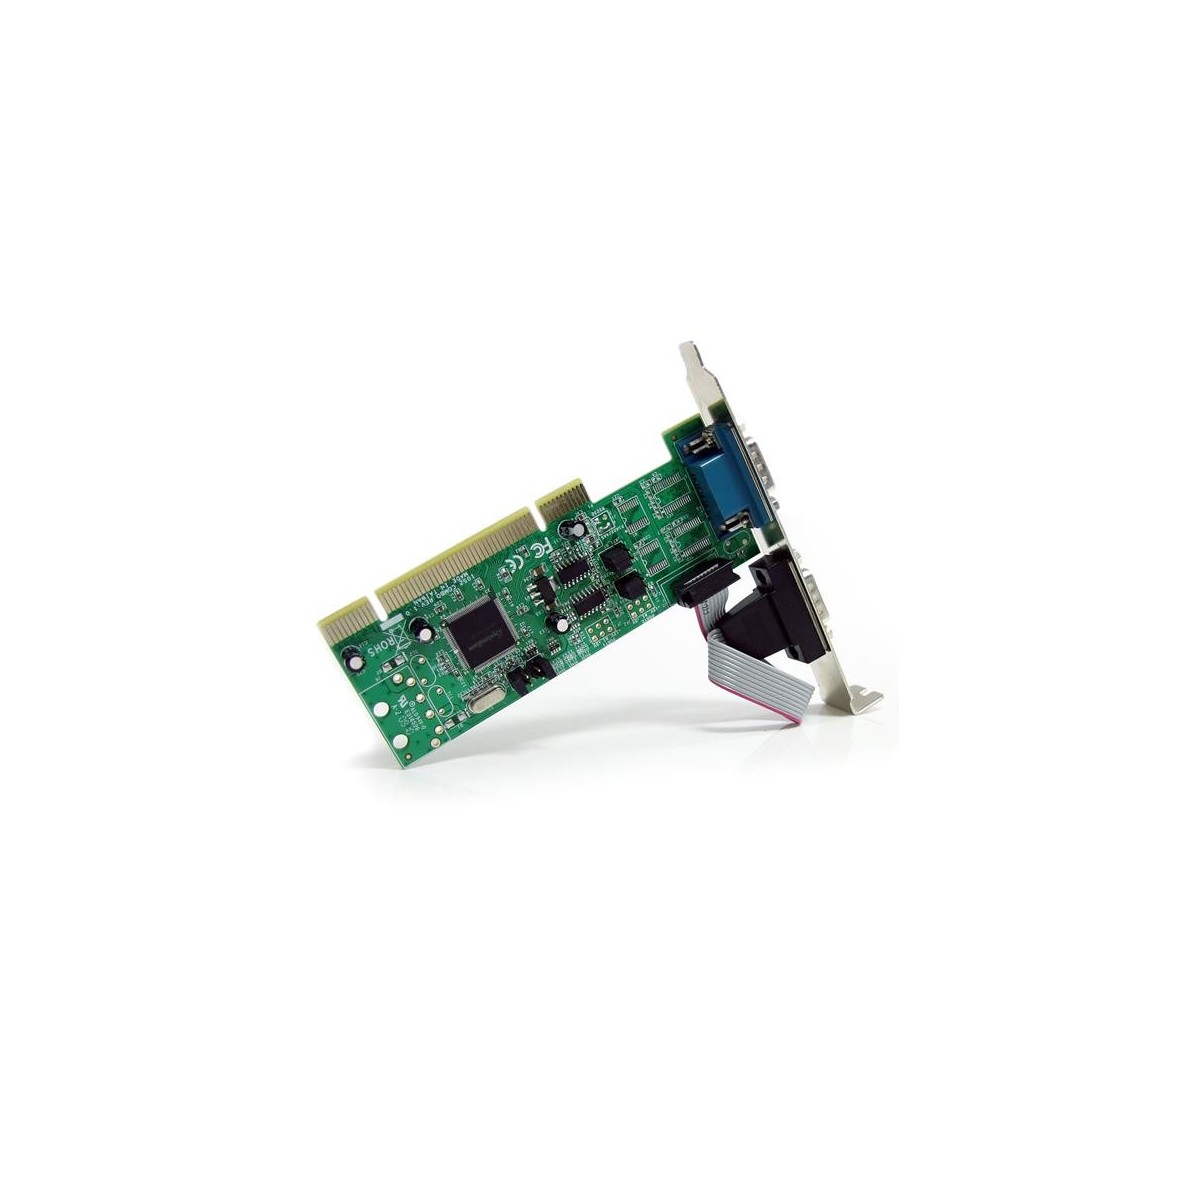 StarTech.com 2 Port PCI RS422/485 Serial Adapter Card with 161050 UART - PCI/PCI-X - Serial - RS-422,RS-485 - CE - FCC - SystemB